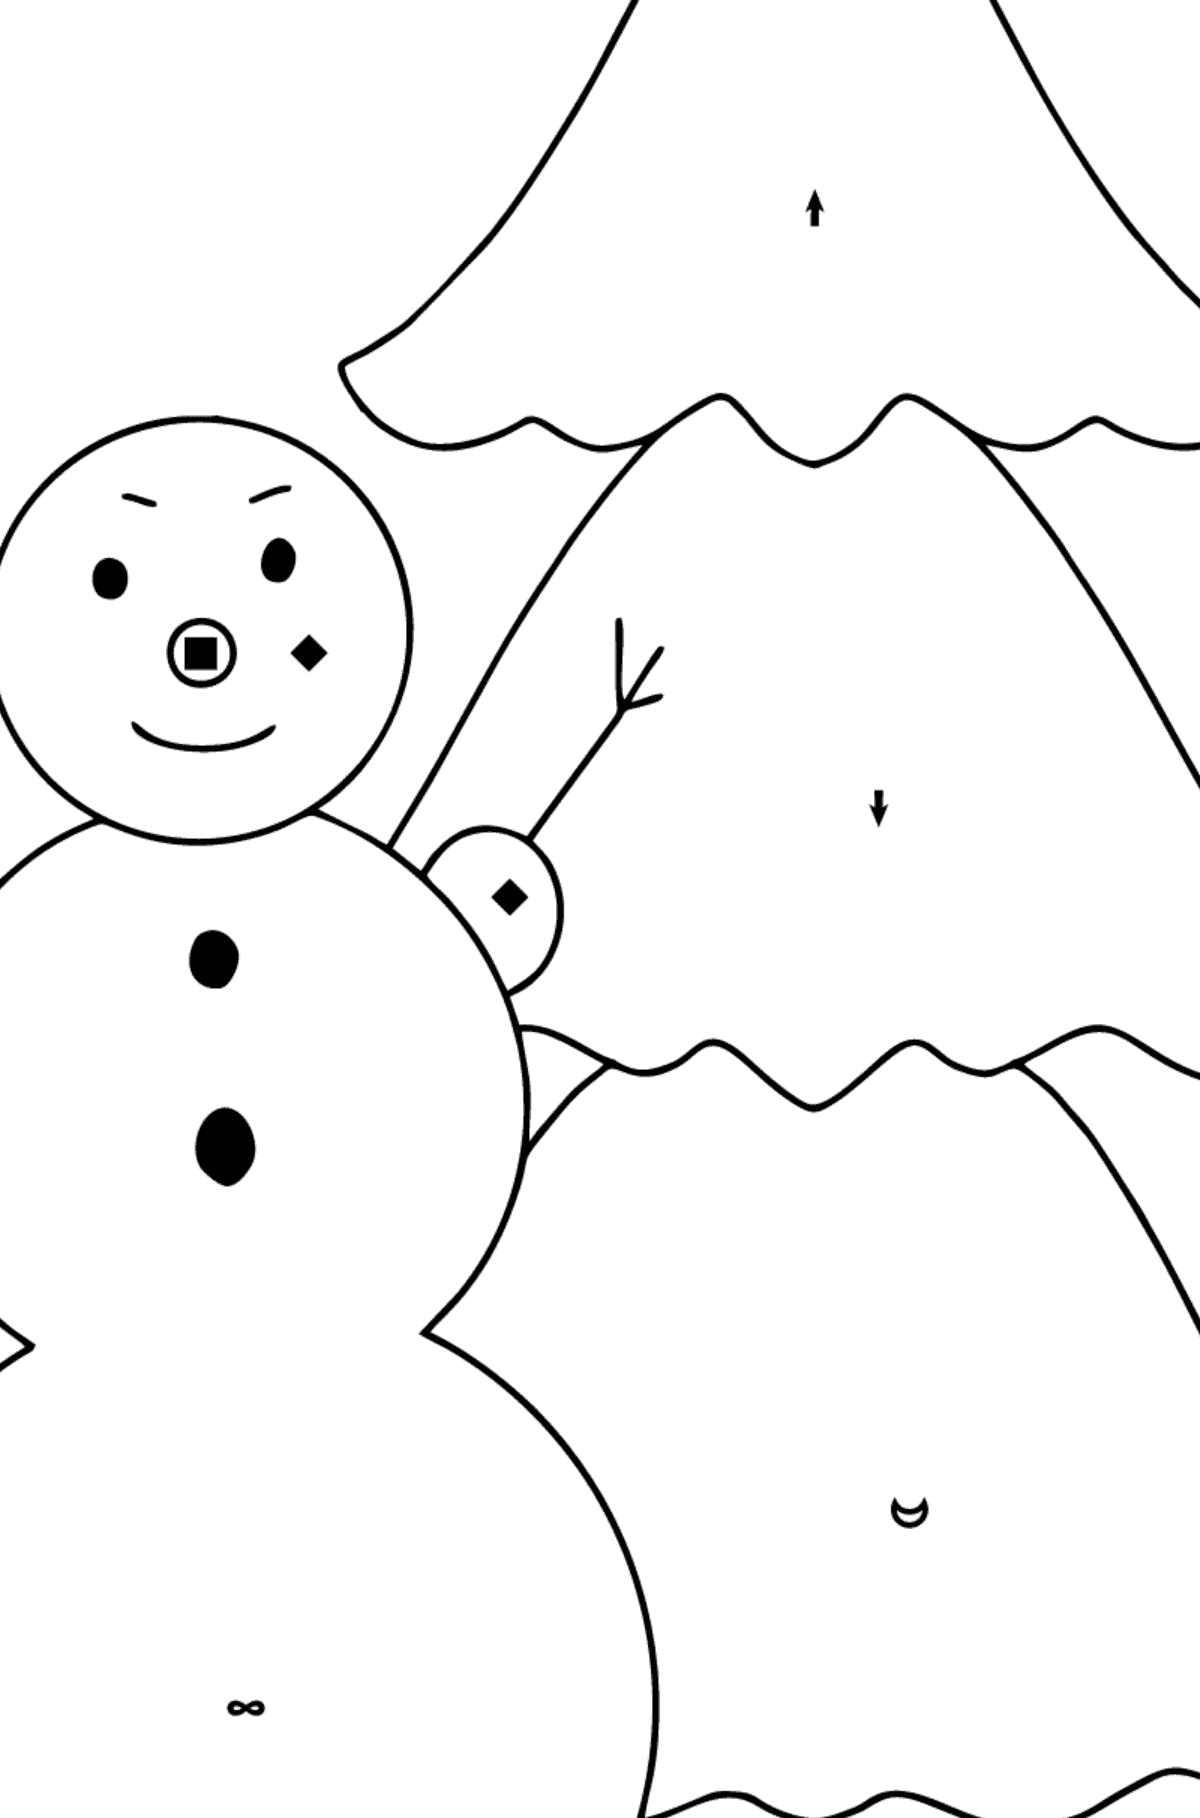 Snowman coloring page for kids - Coloring by Symbols for Kids